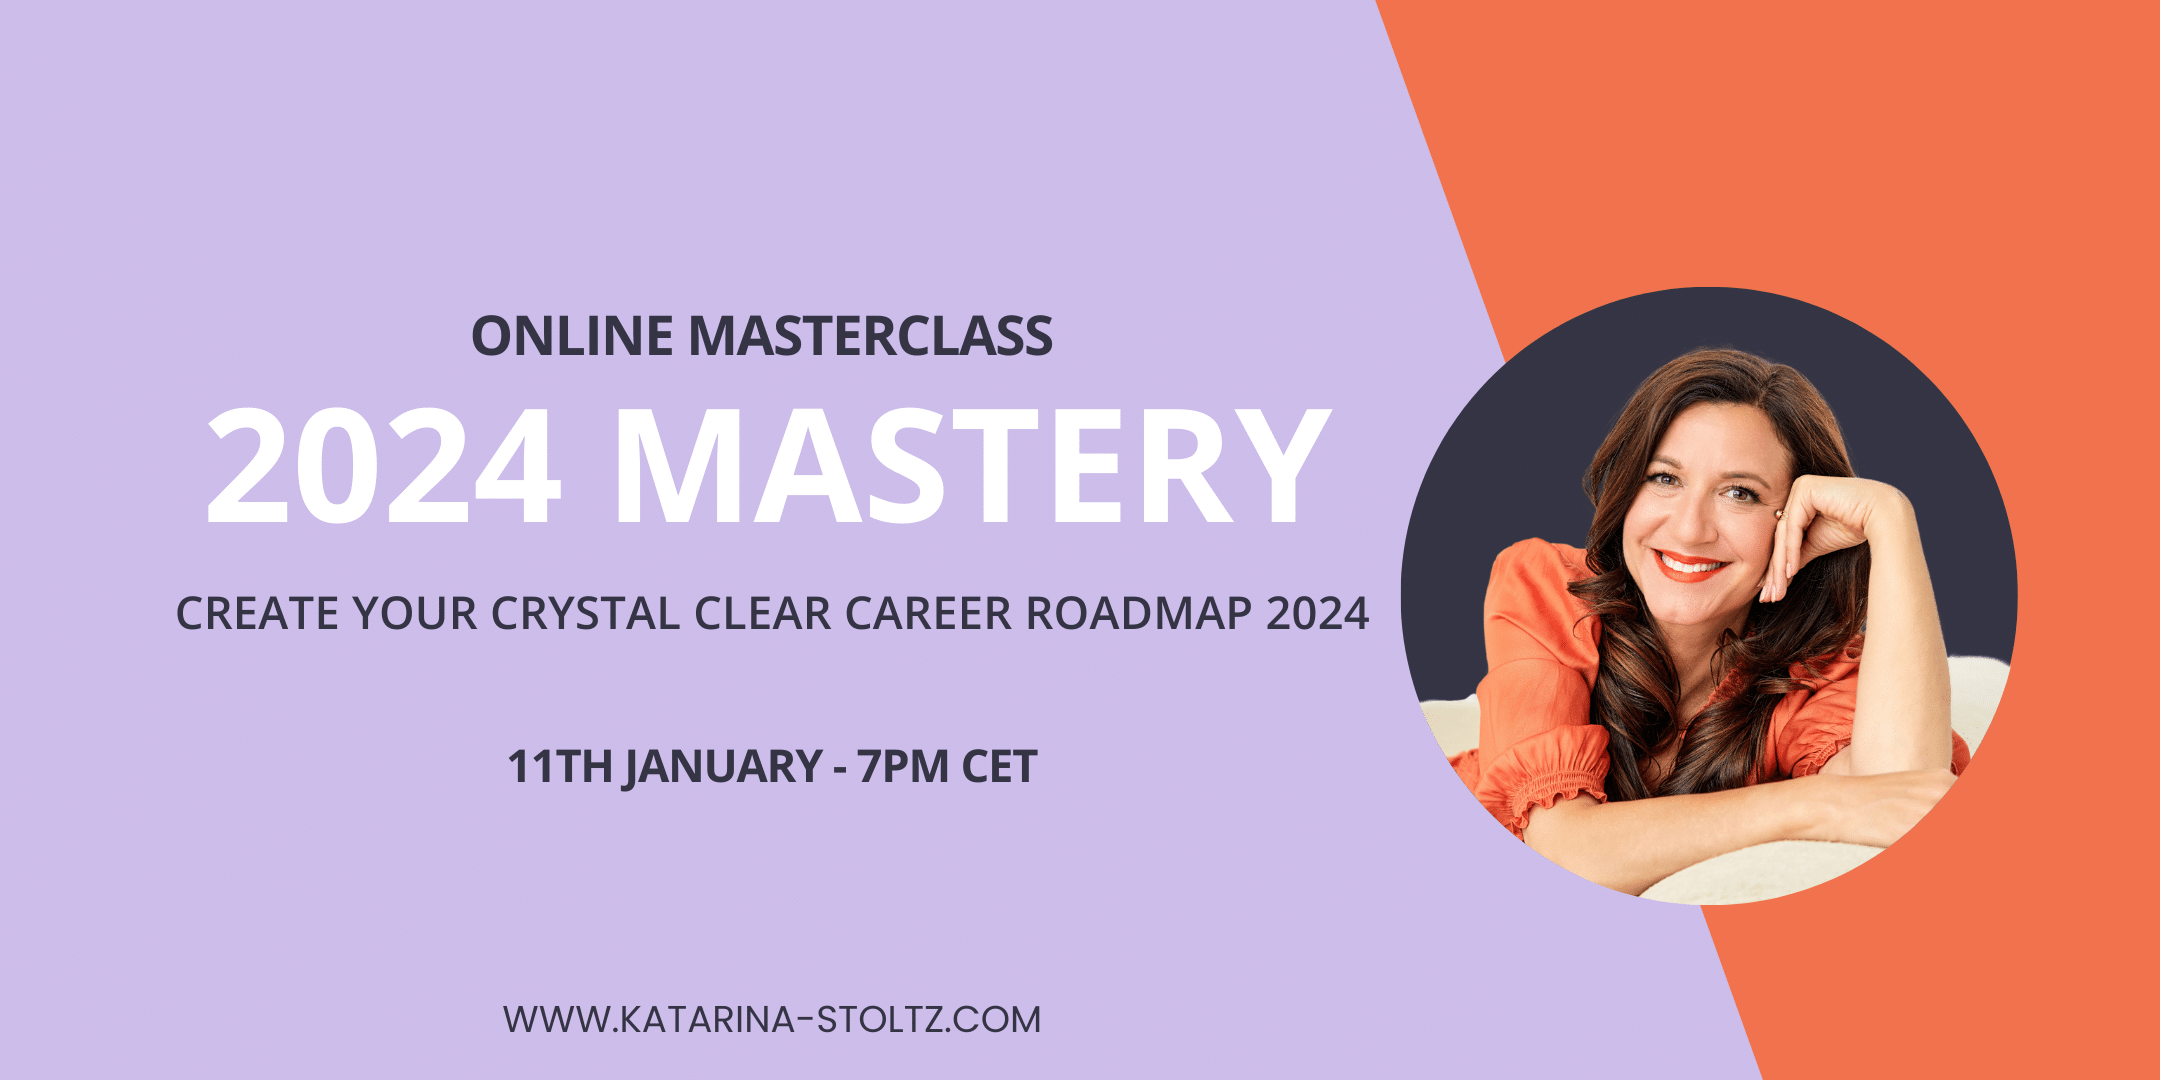 2024 Mastery online career masterclass with Katarina Stoltz Life Coaching and Therapy